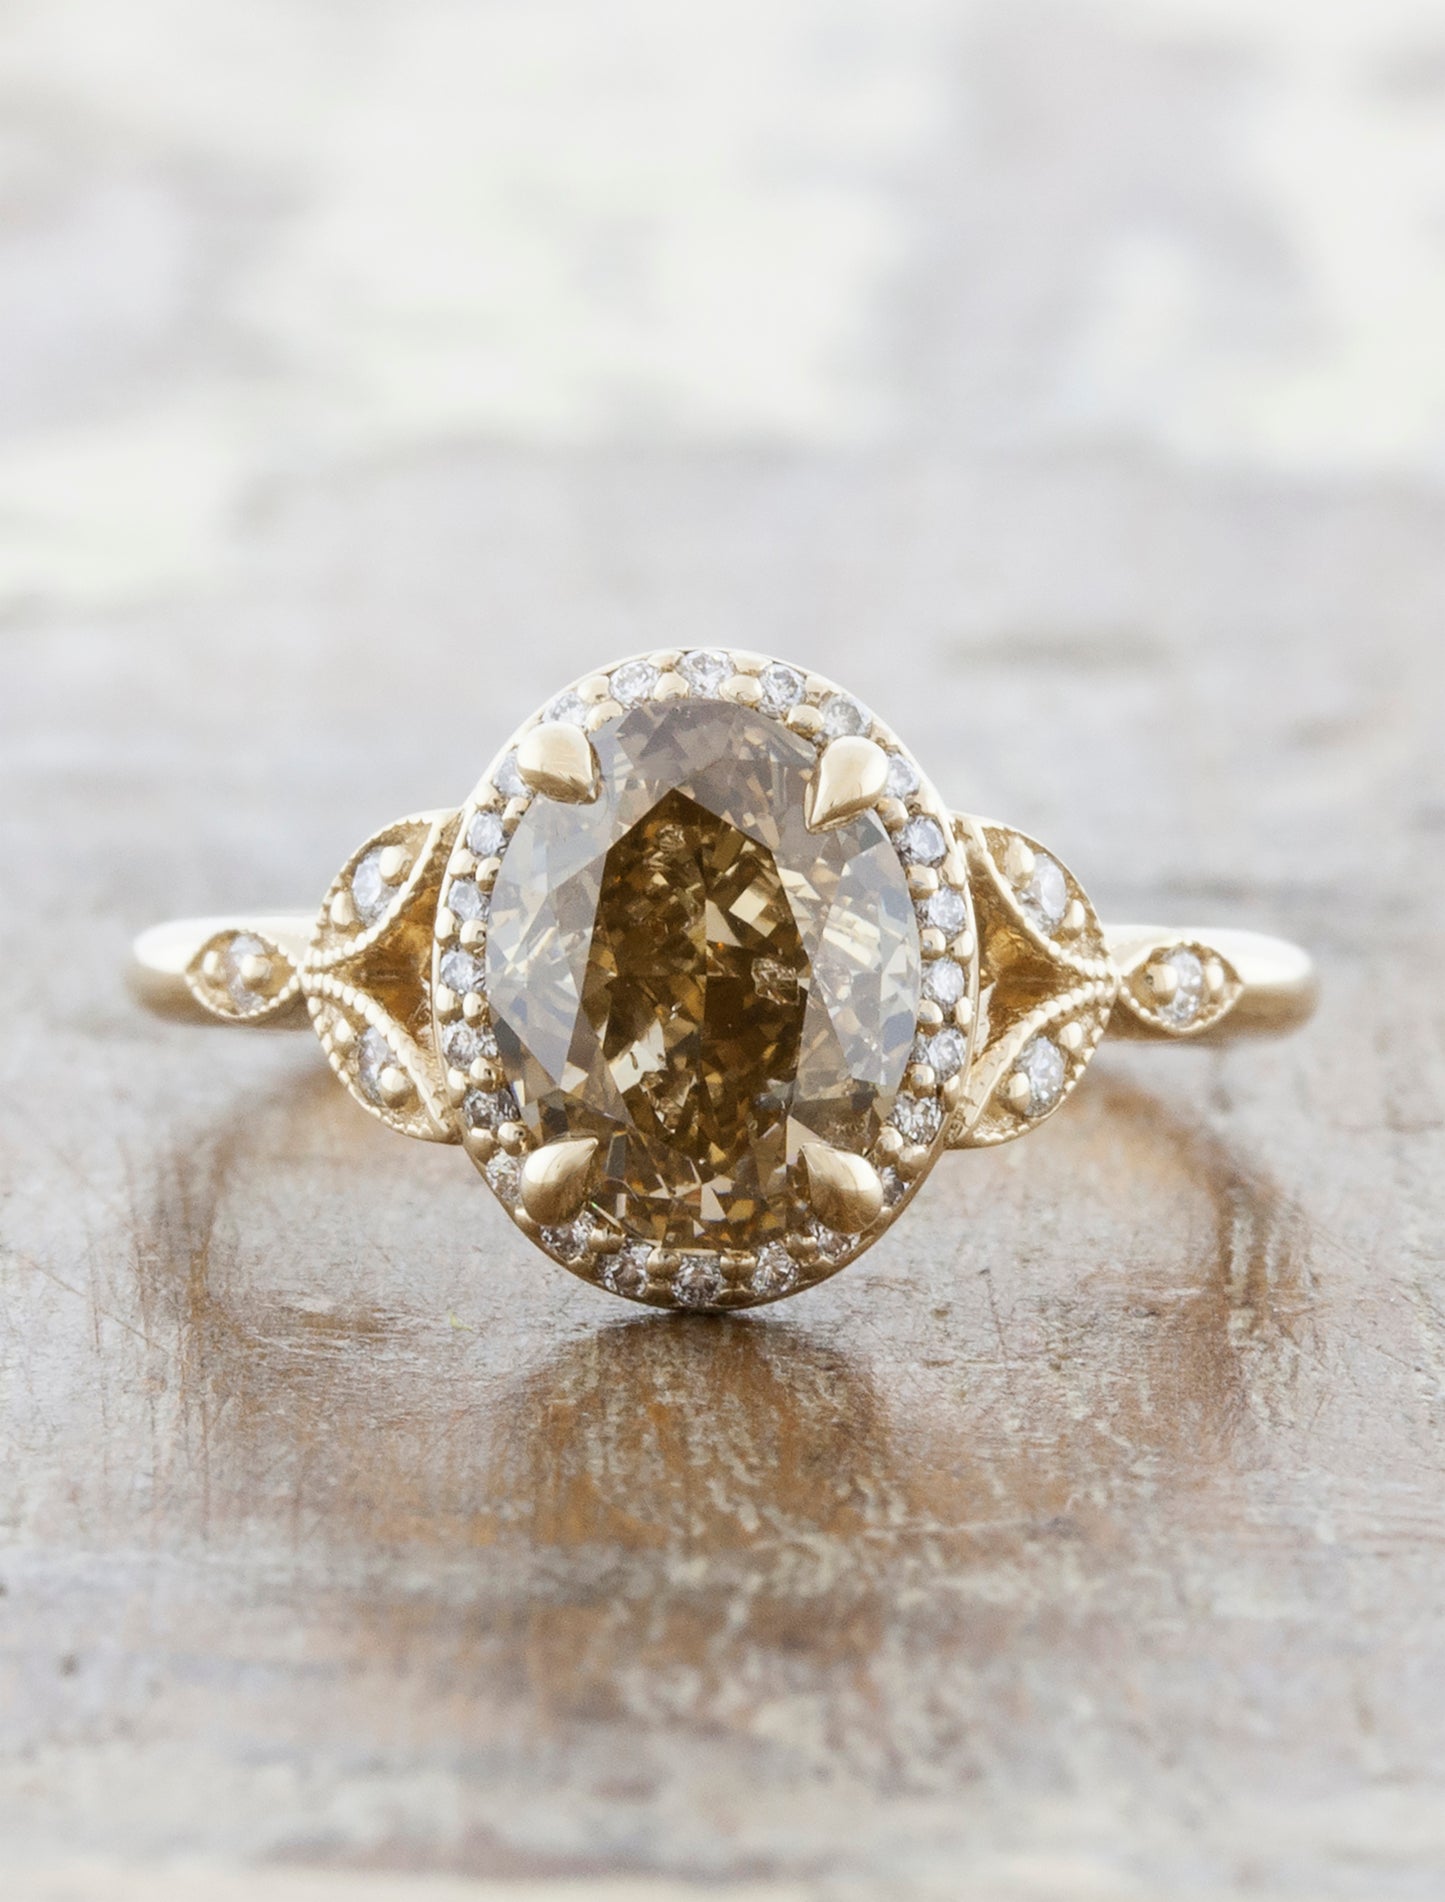 Vintage inspired engagement ring;caption:1.60ct. Oval Cognac Diamond 14k Yellow Gold